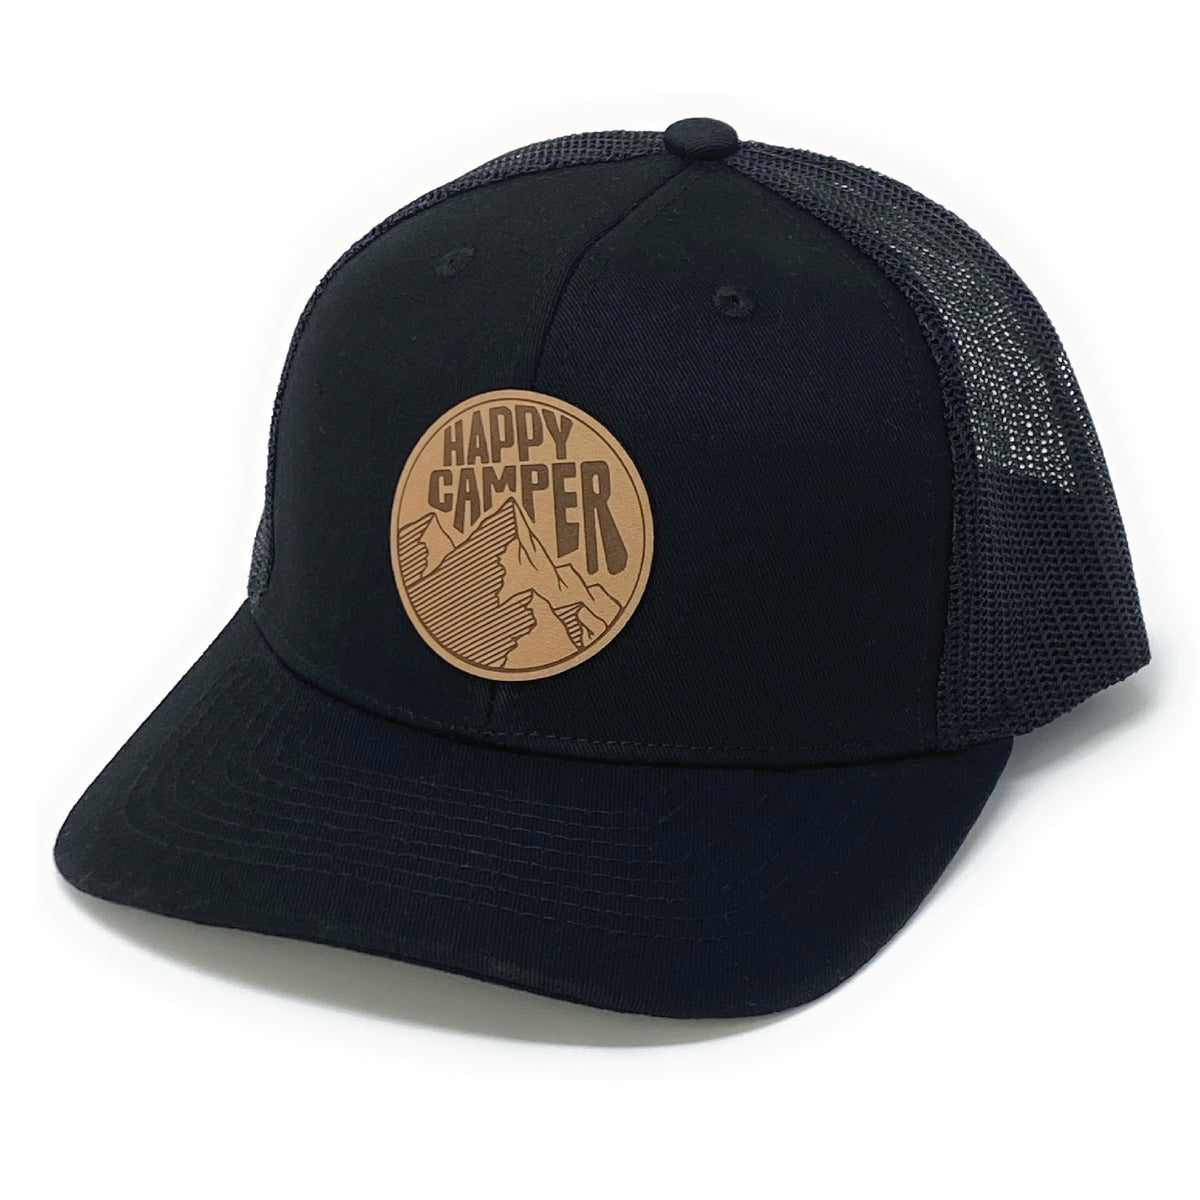 Happy Camper Patch – Cabot Creamery